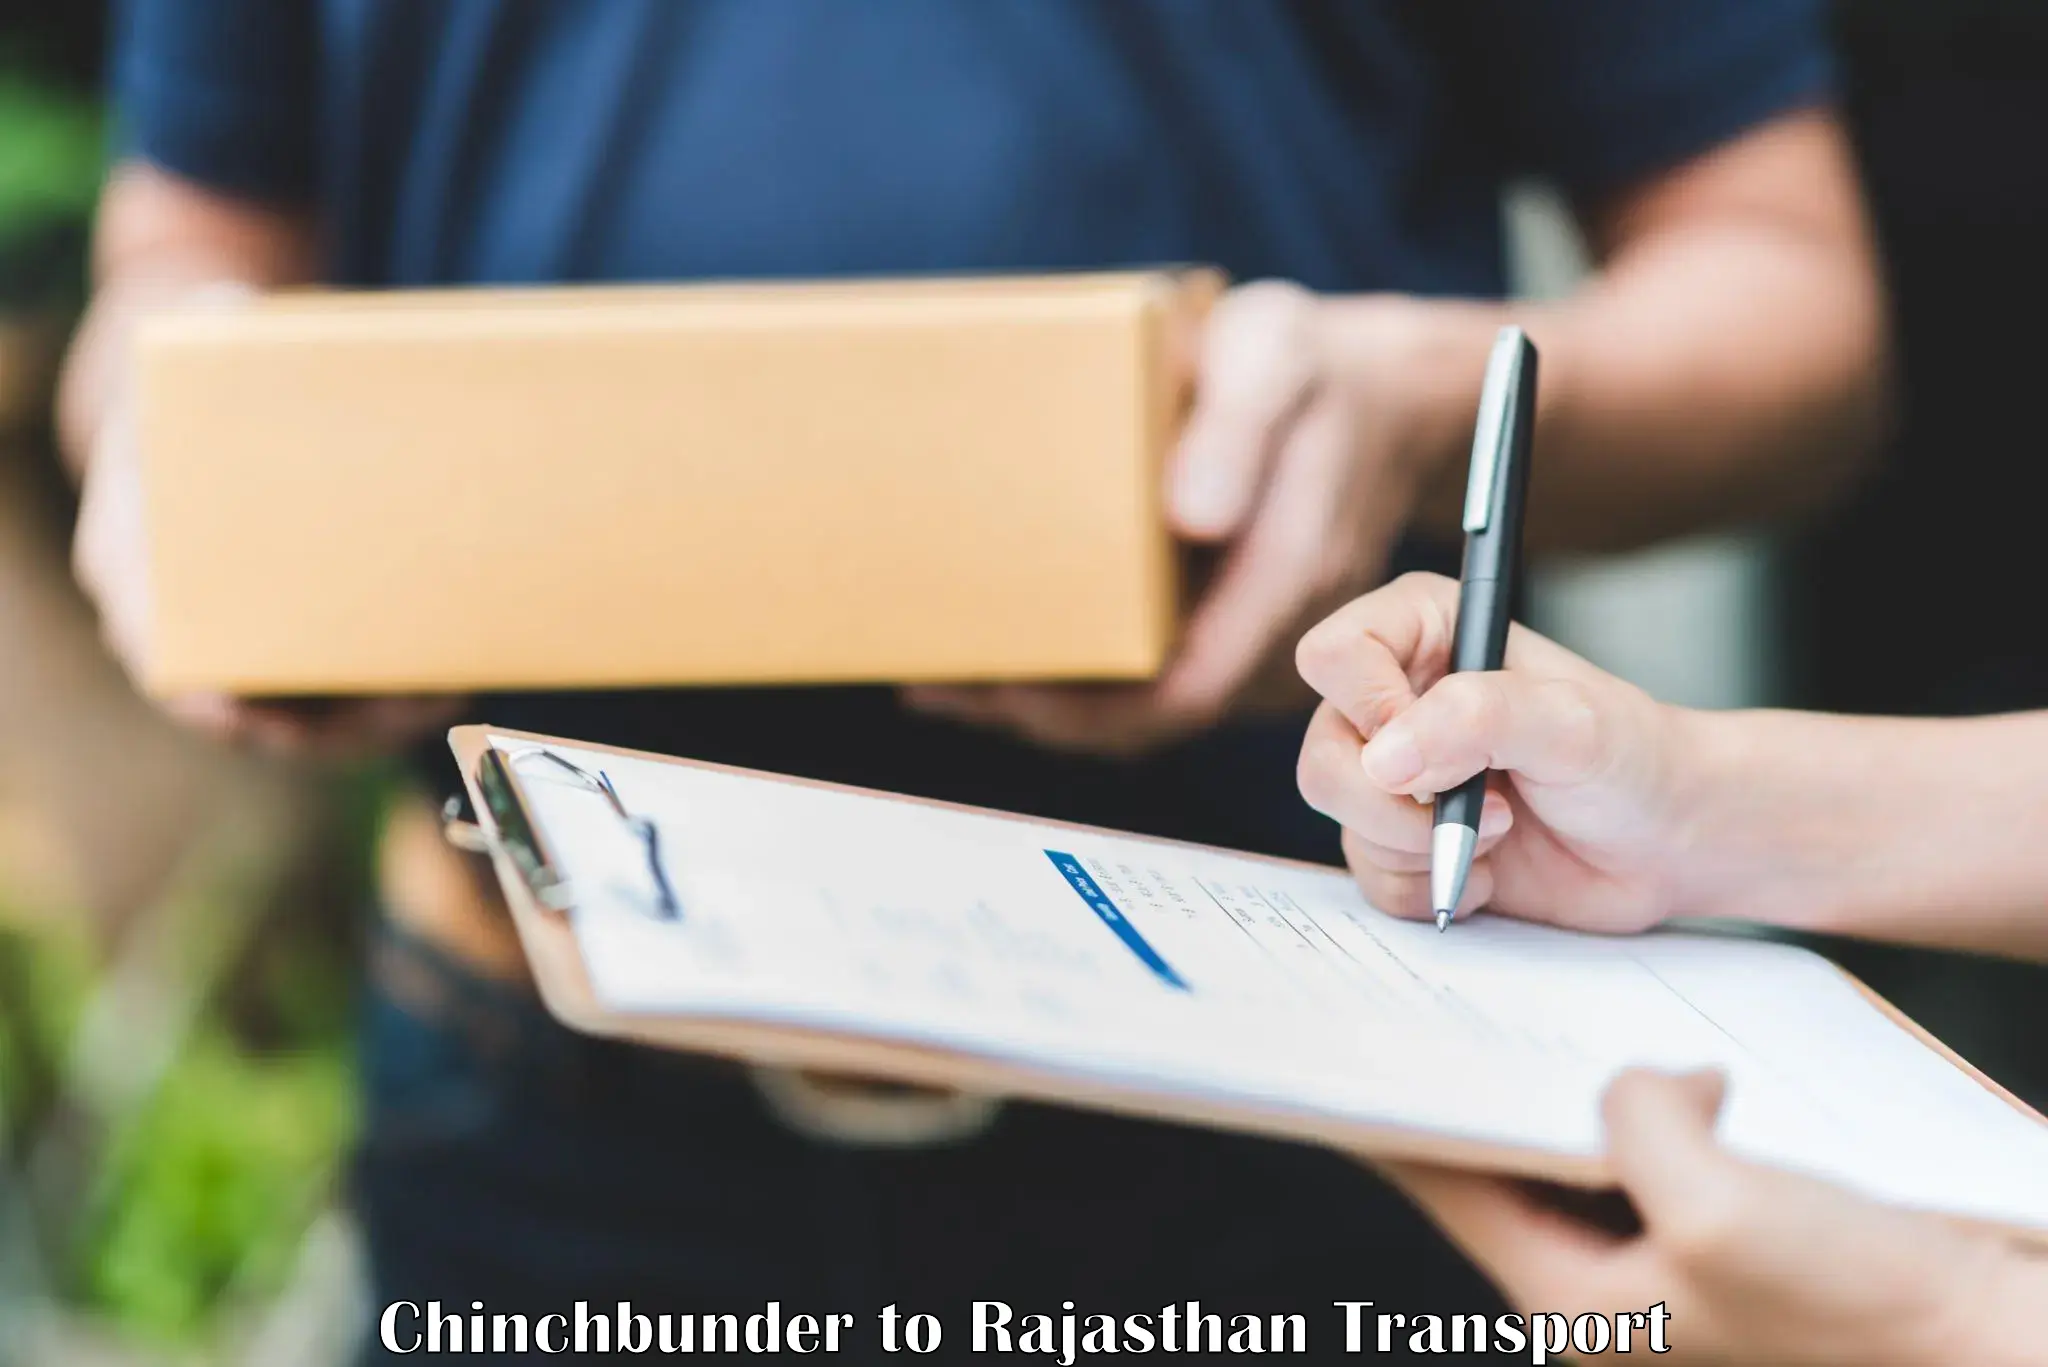 Container transport service Chinchbunder to Mathania